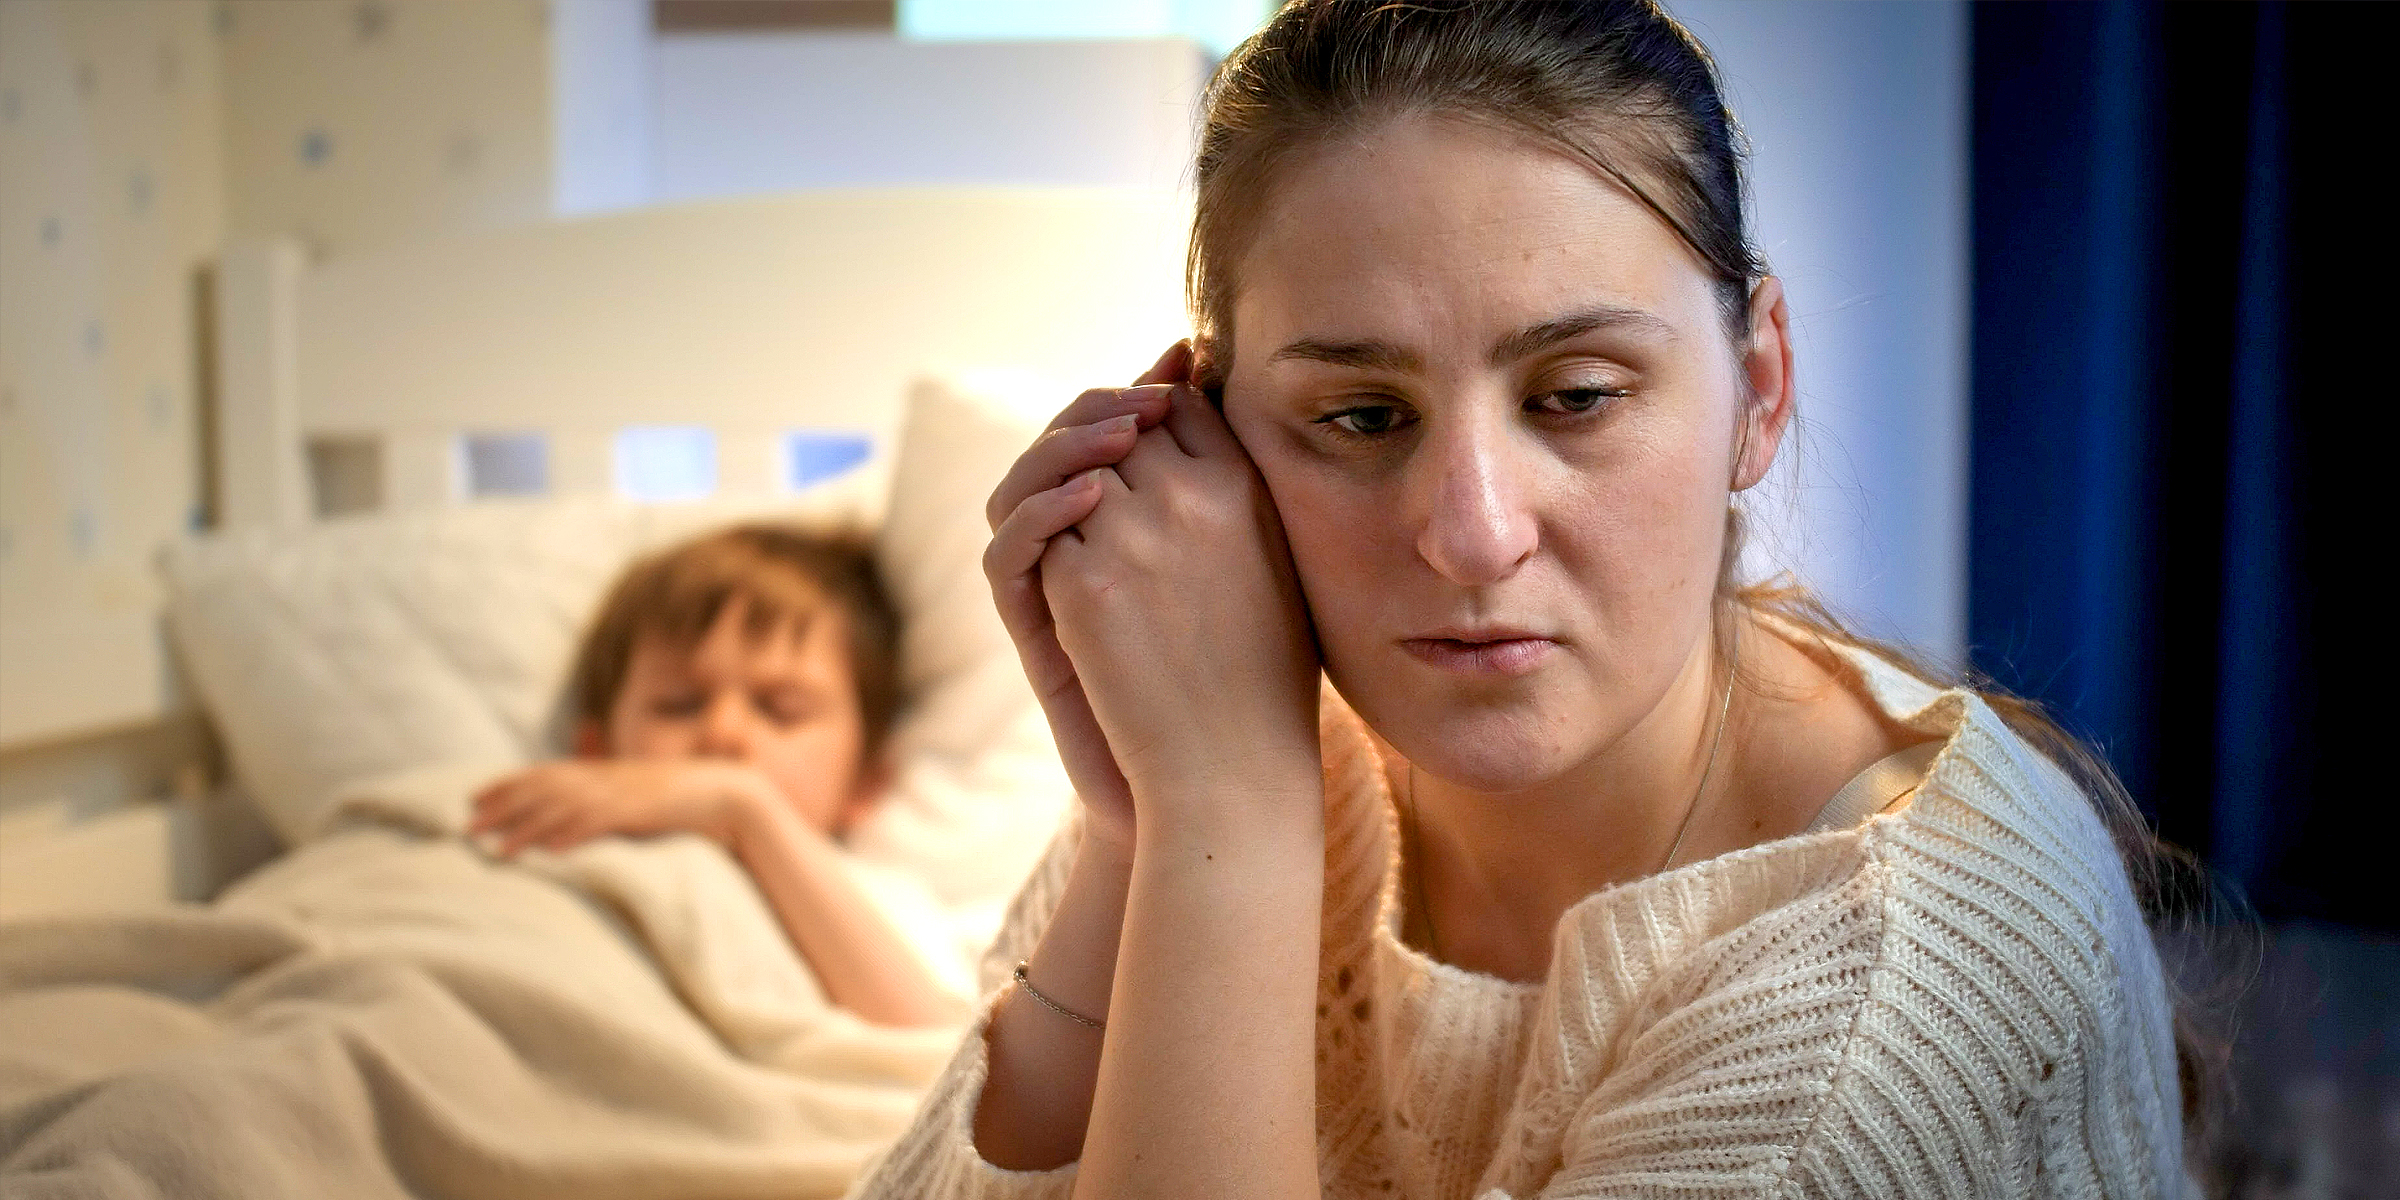 An upset woman sitting beside a child sleeping in his bed | Source: Shutterstock